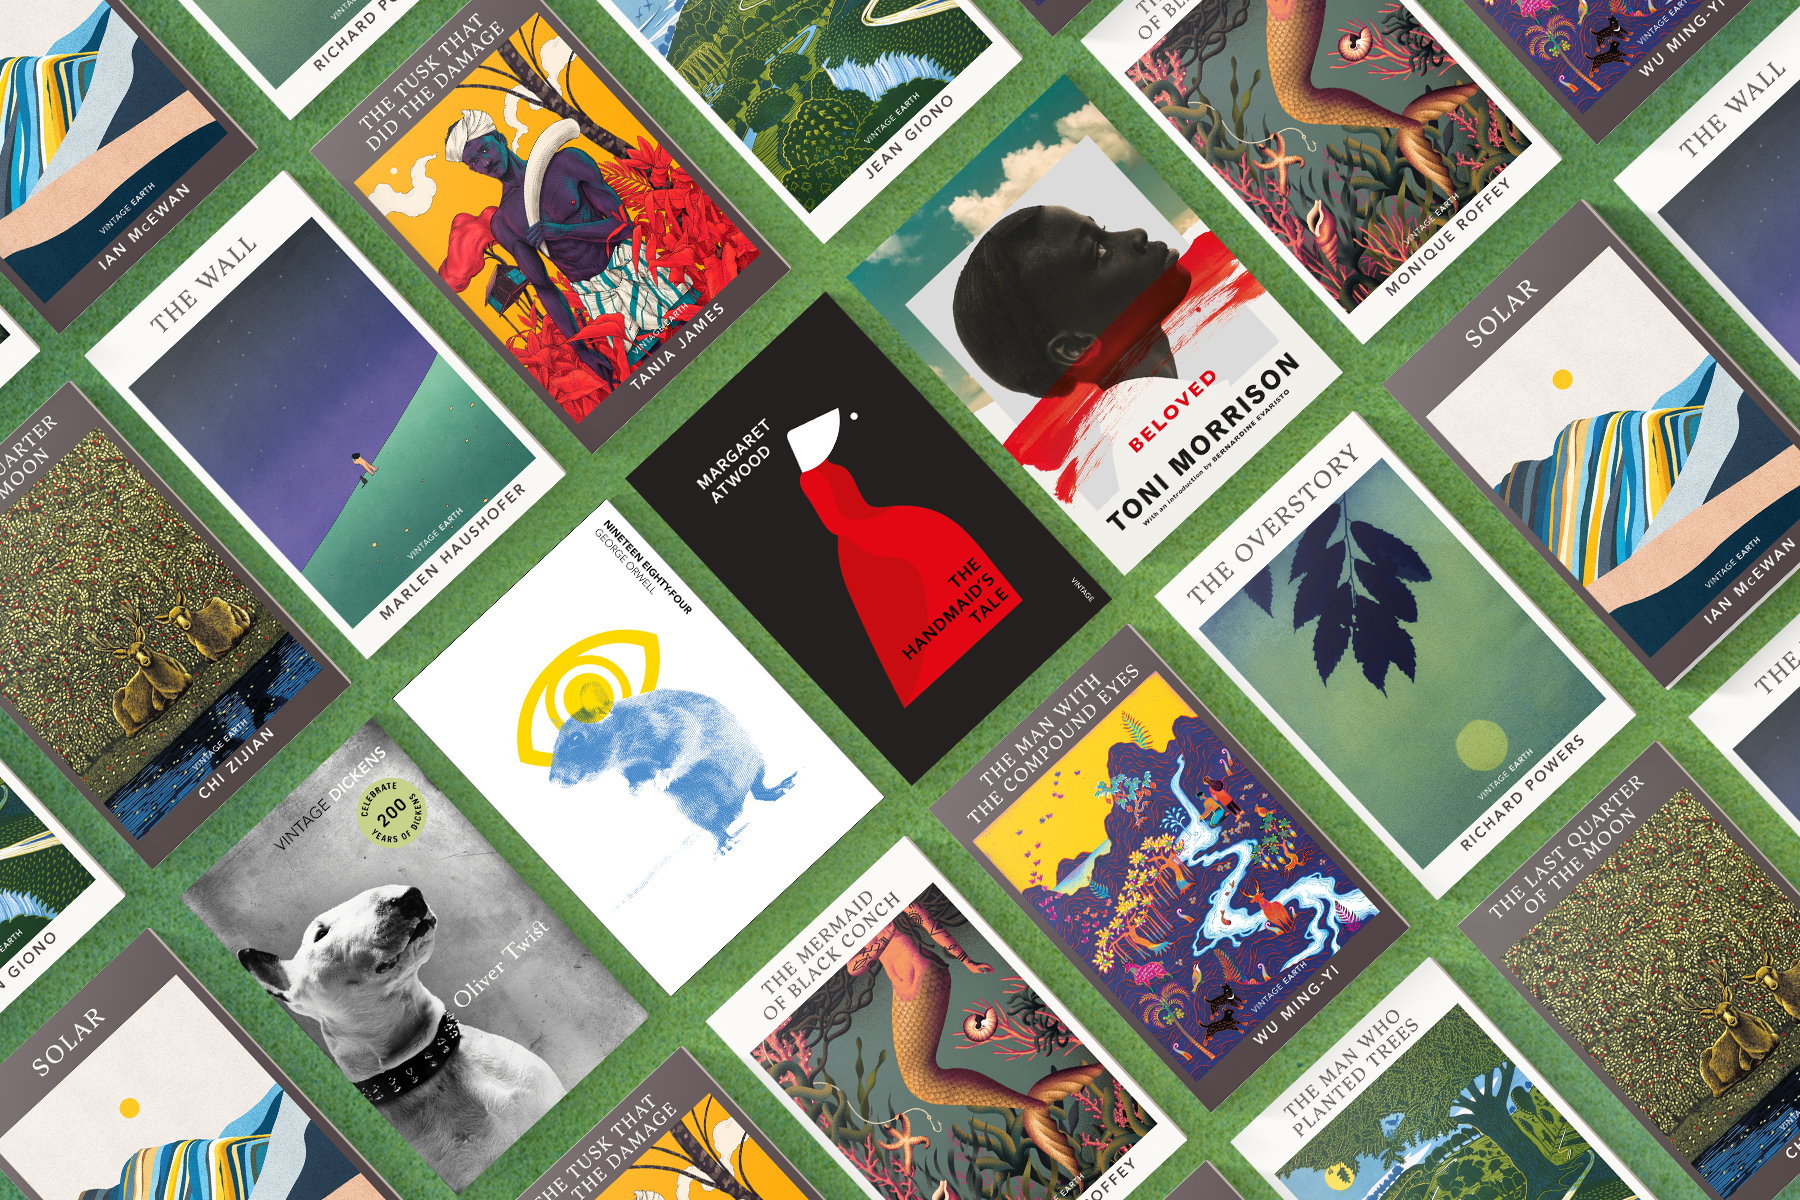 Tiled jackets of fiction books that have changed the world, in Vintage Earth-themed colour scheme